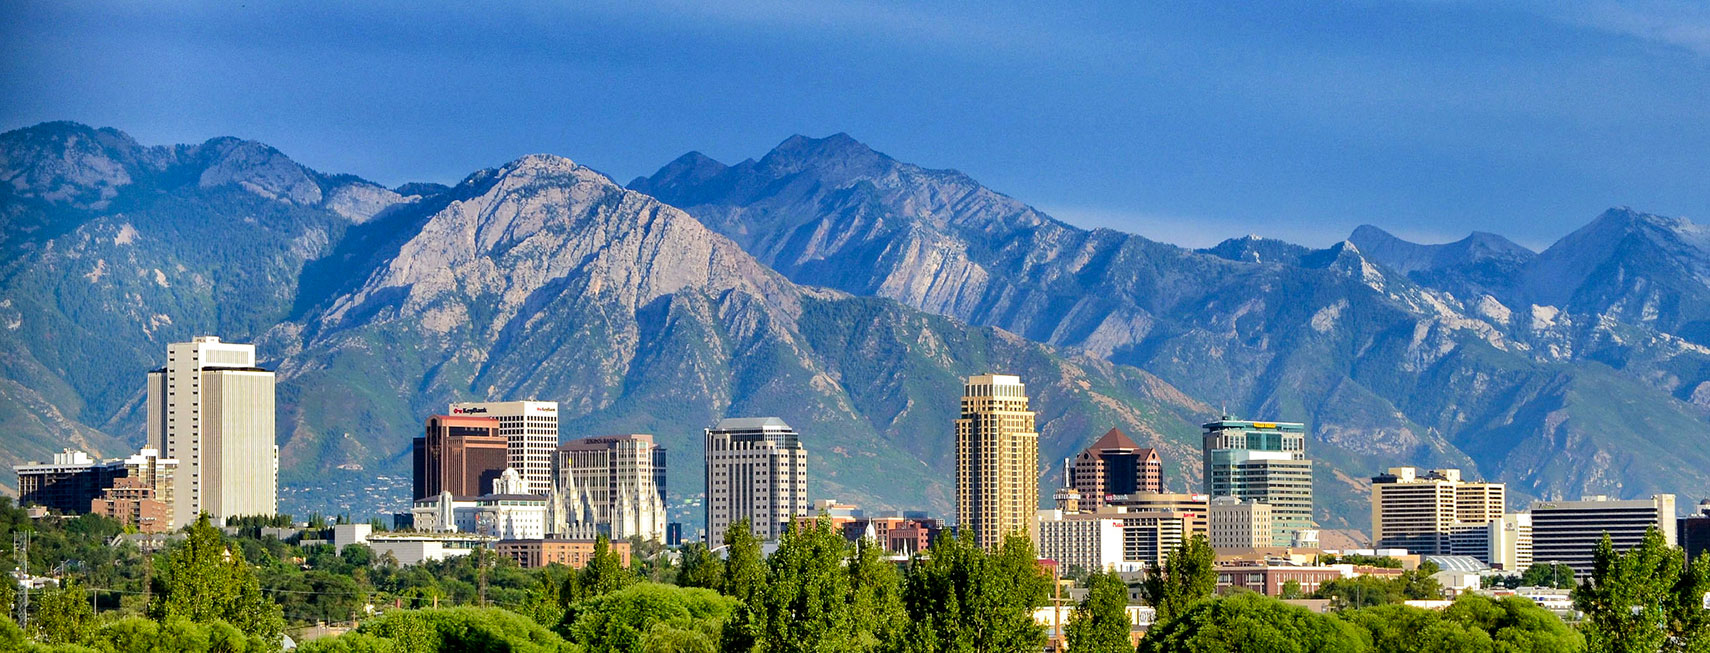 View of Salt Lake City skyline with Wasatch Mountain Range in the background